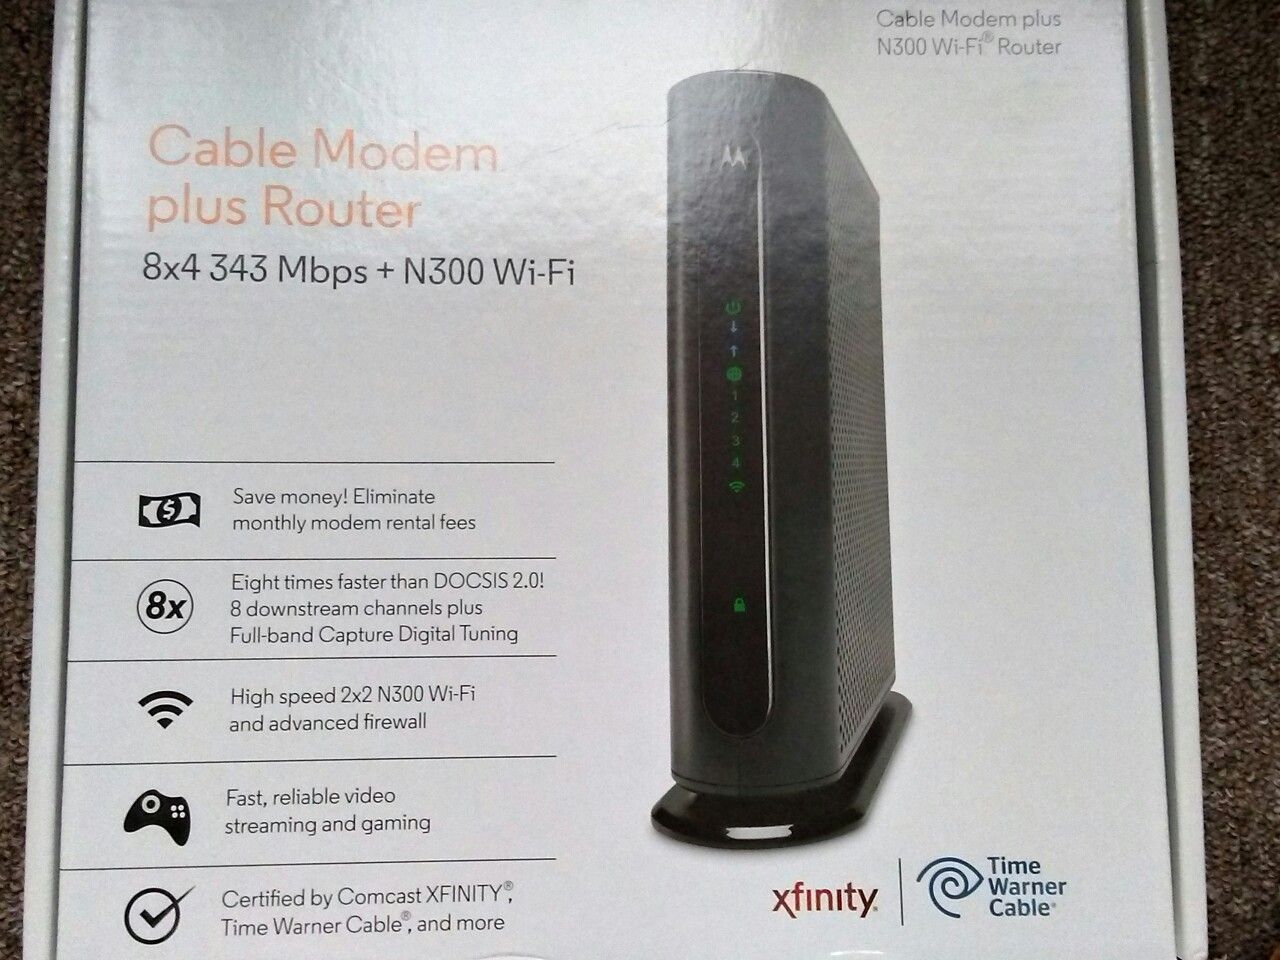 Cable Modem plus Router, Motorola, Model MG7310, 8x4 343 Mbps + N300 Wi-Fi